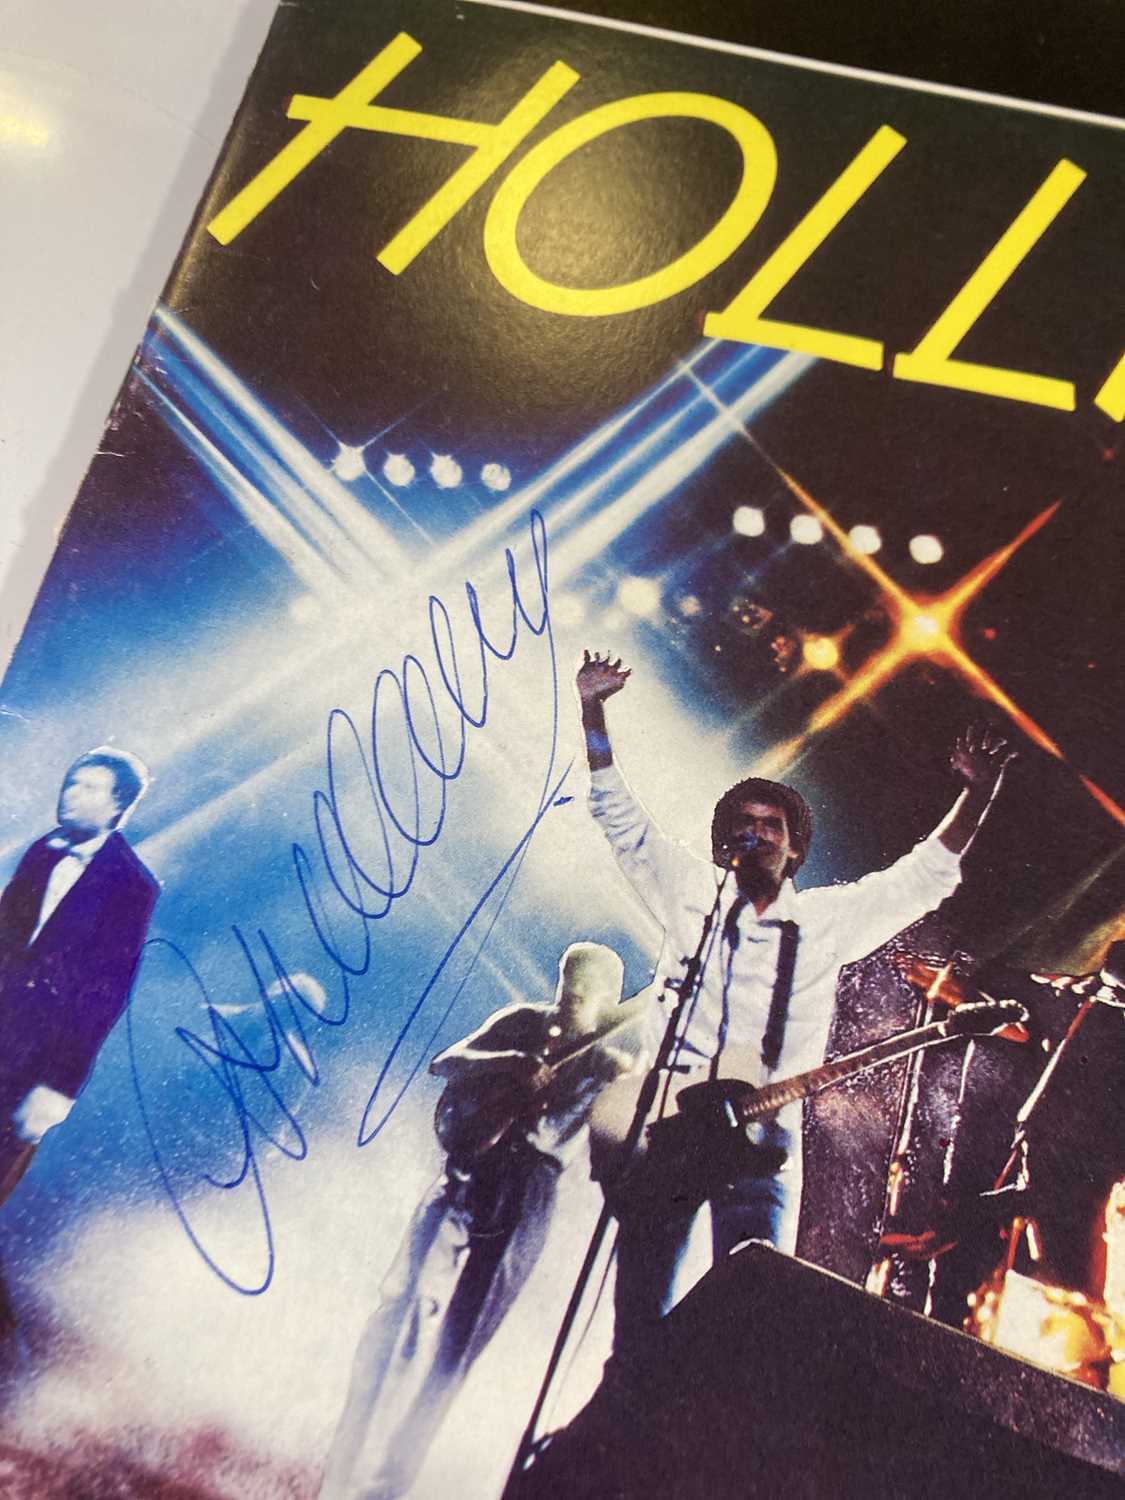 CONCERT MEMORABILIA INC PROGRAMMES AND POSTERS - BOB DYLAN / BEE GEES. - Image 9 of 9